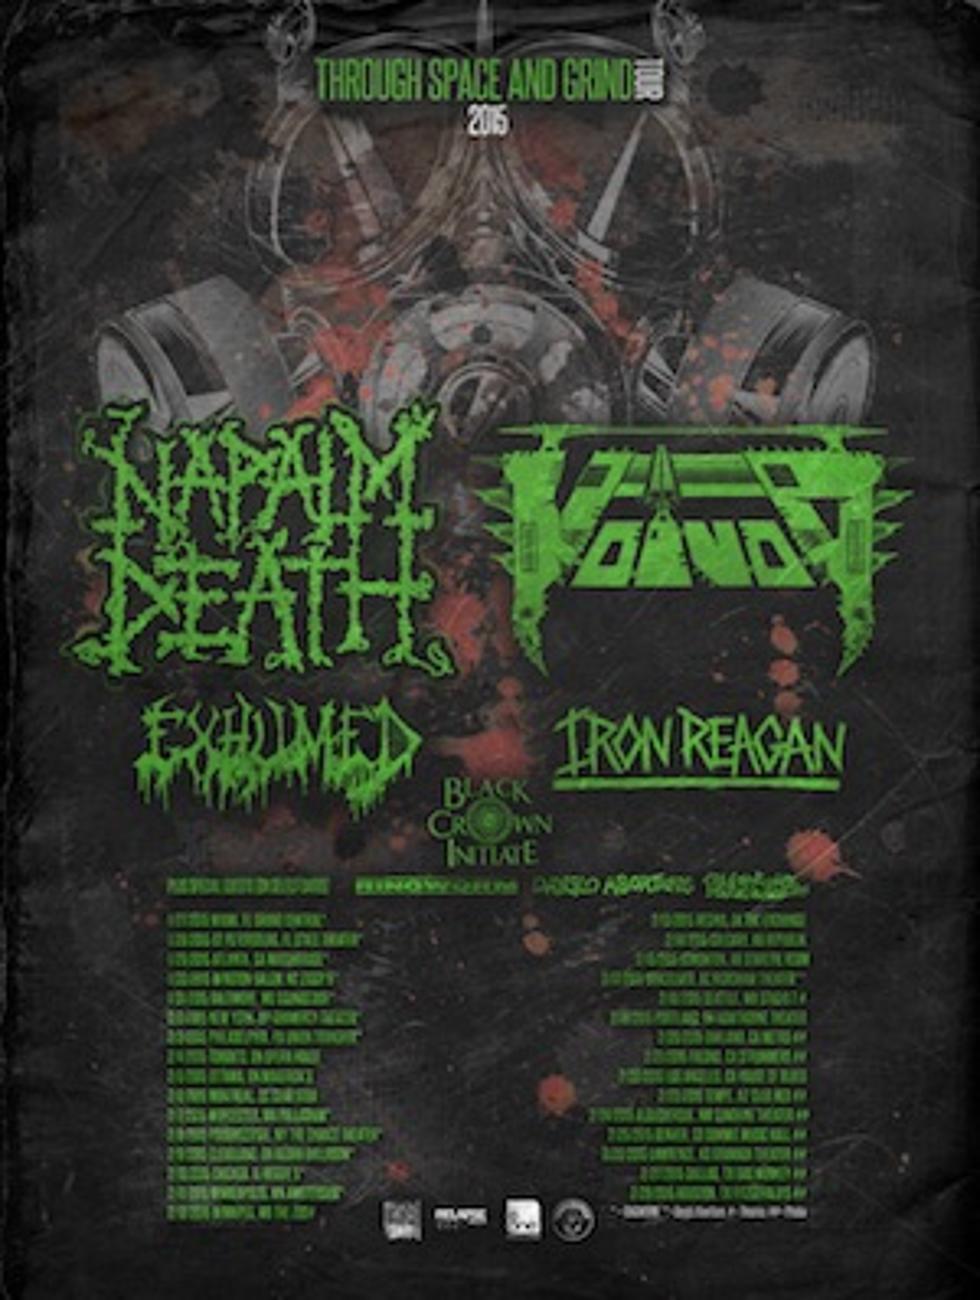 Napalm Death and Voivod Announce 2015 North American Tour With Exhumed, Iron Reagan + More